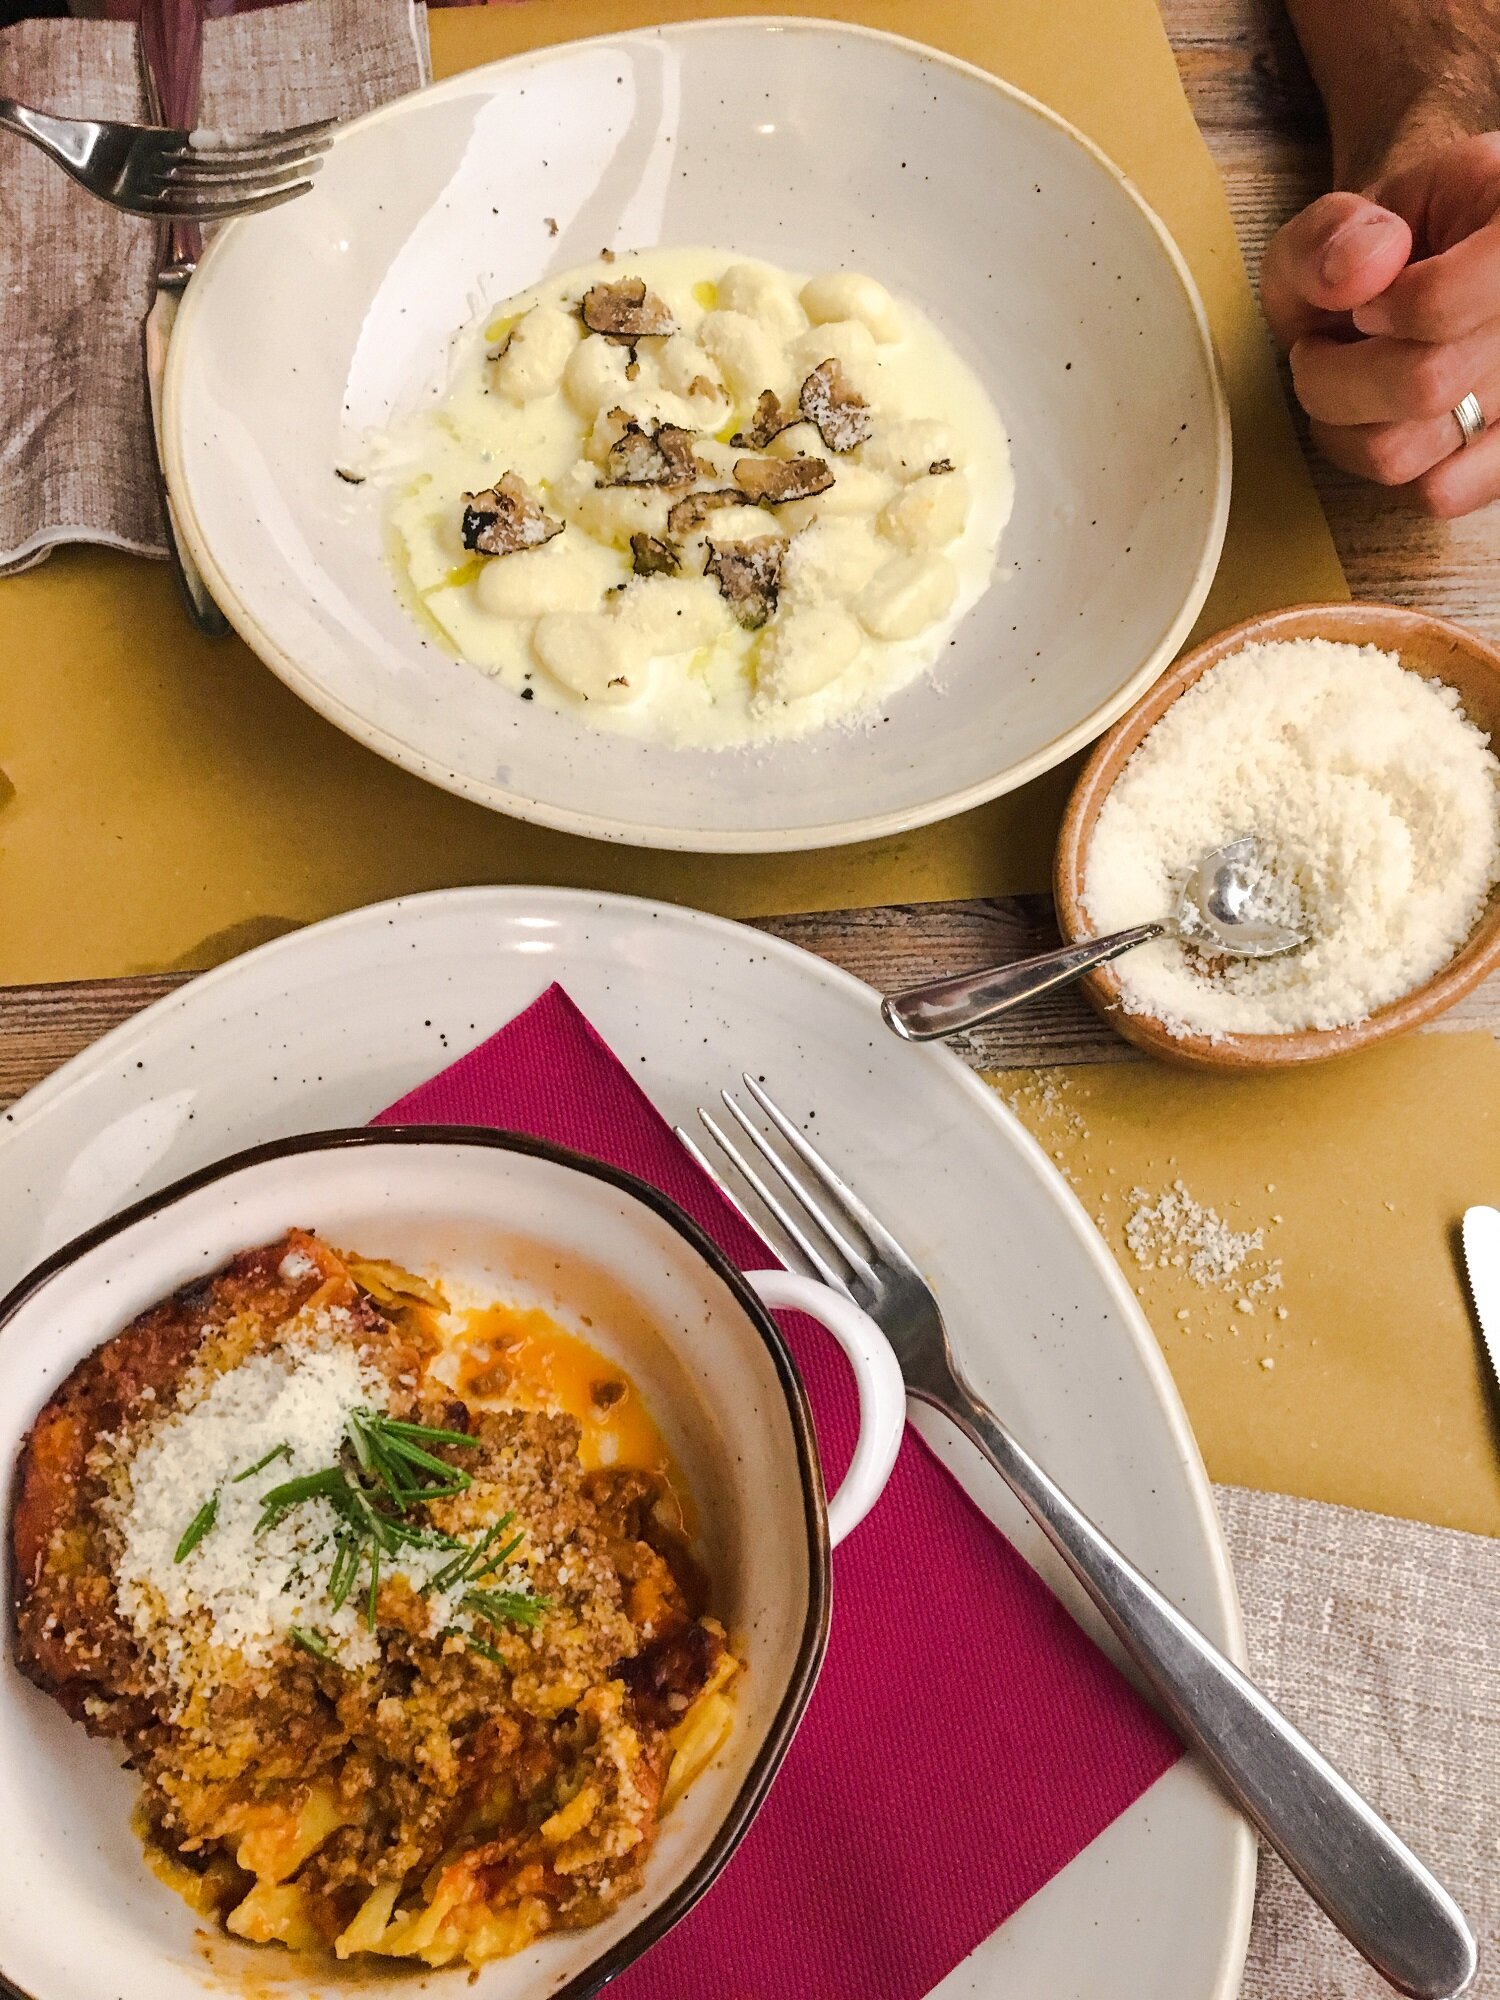 Meal at Corte dei Pazzi restaurant | Blooming Magnolias Blog | Travel, Florence, Italy